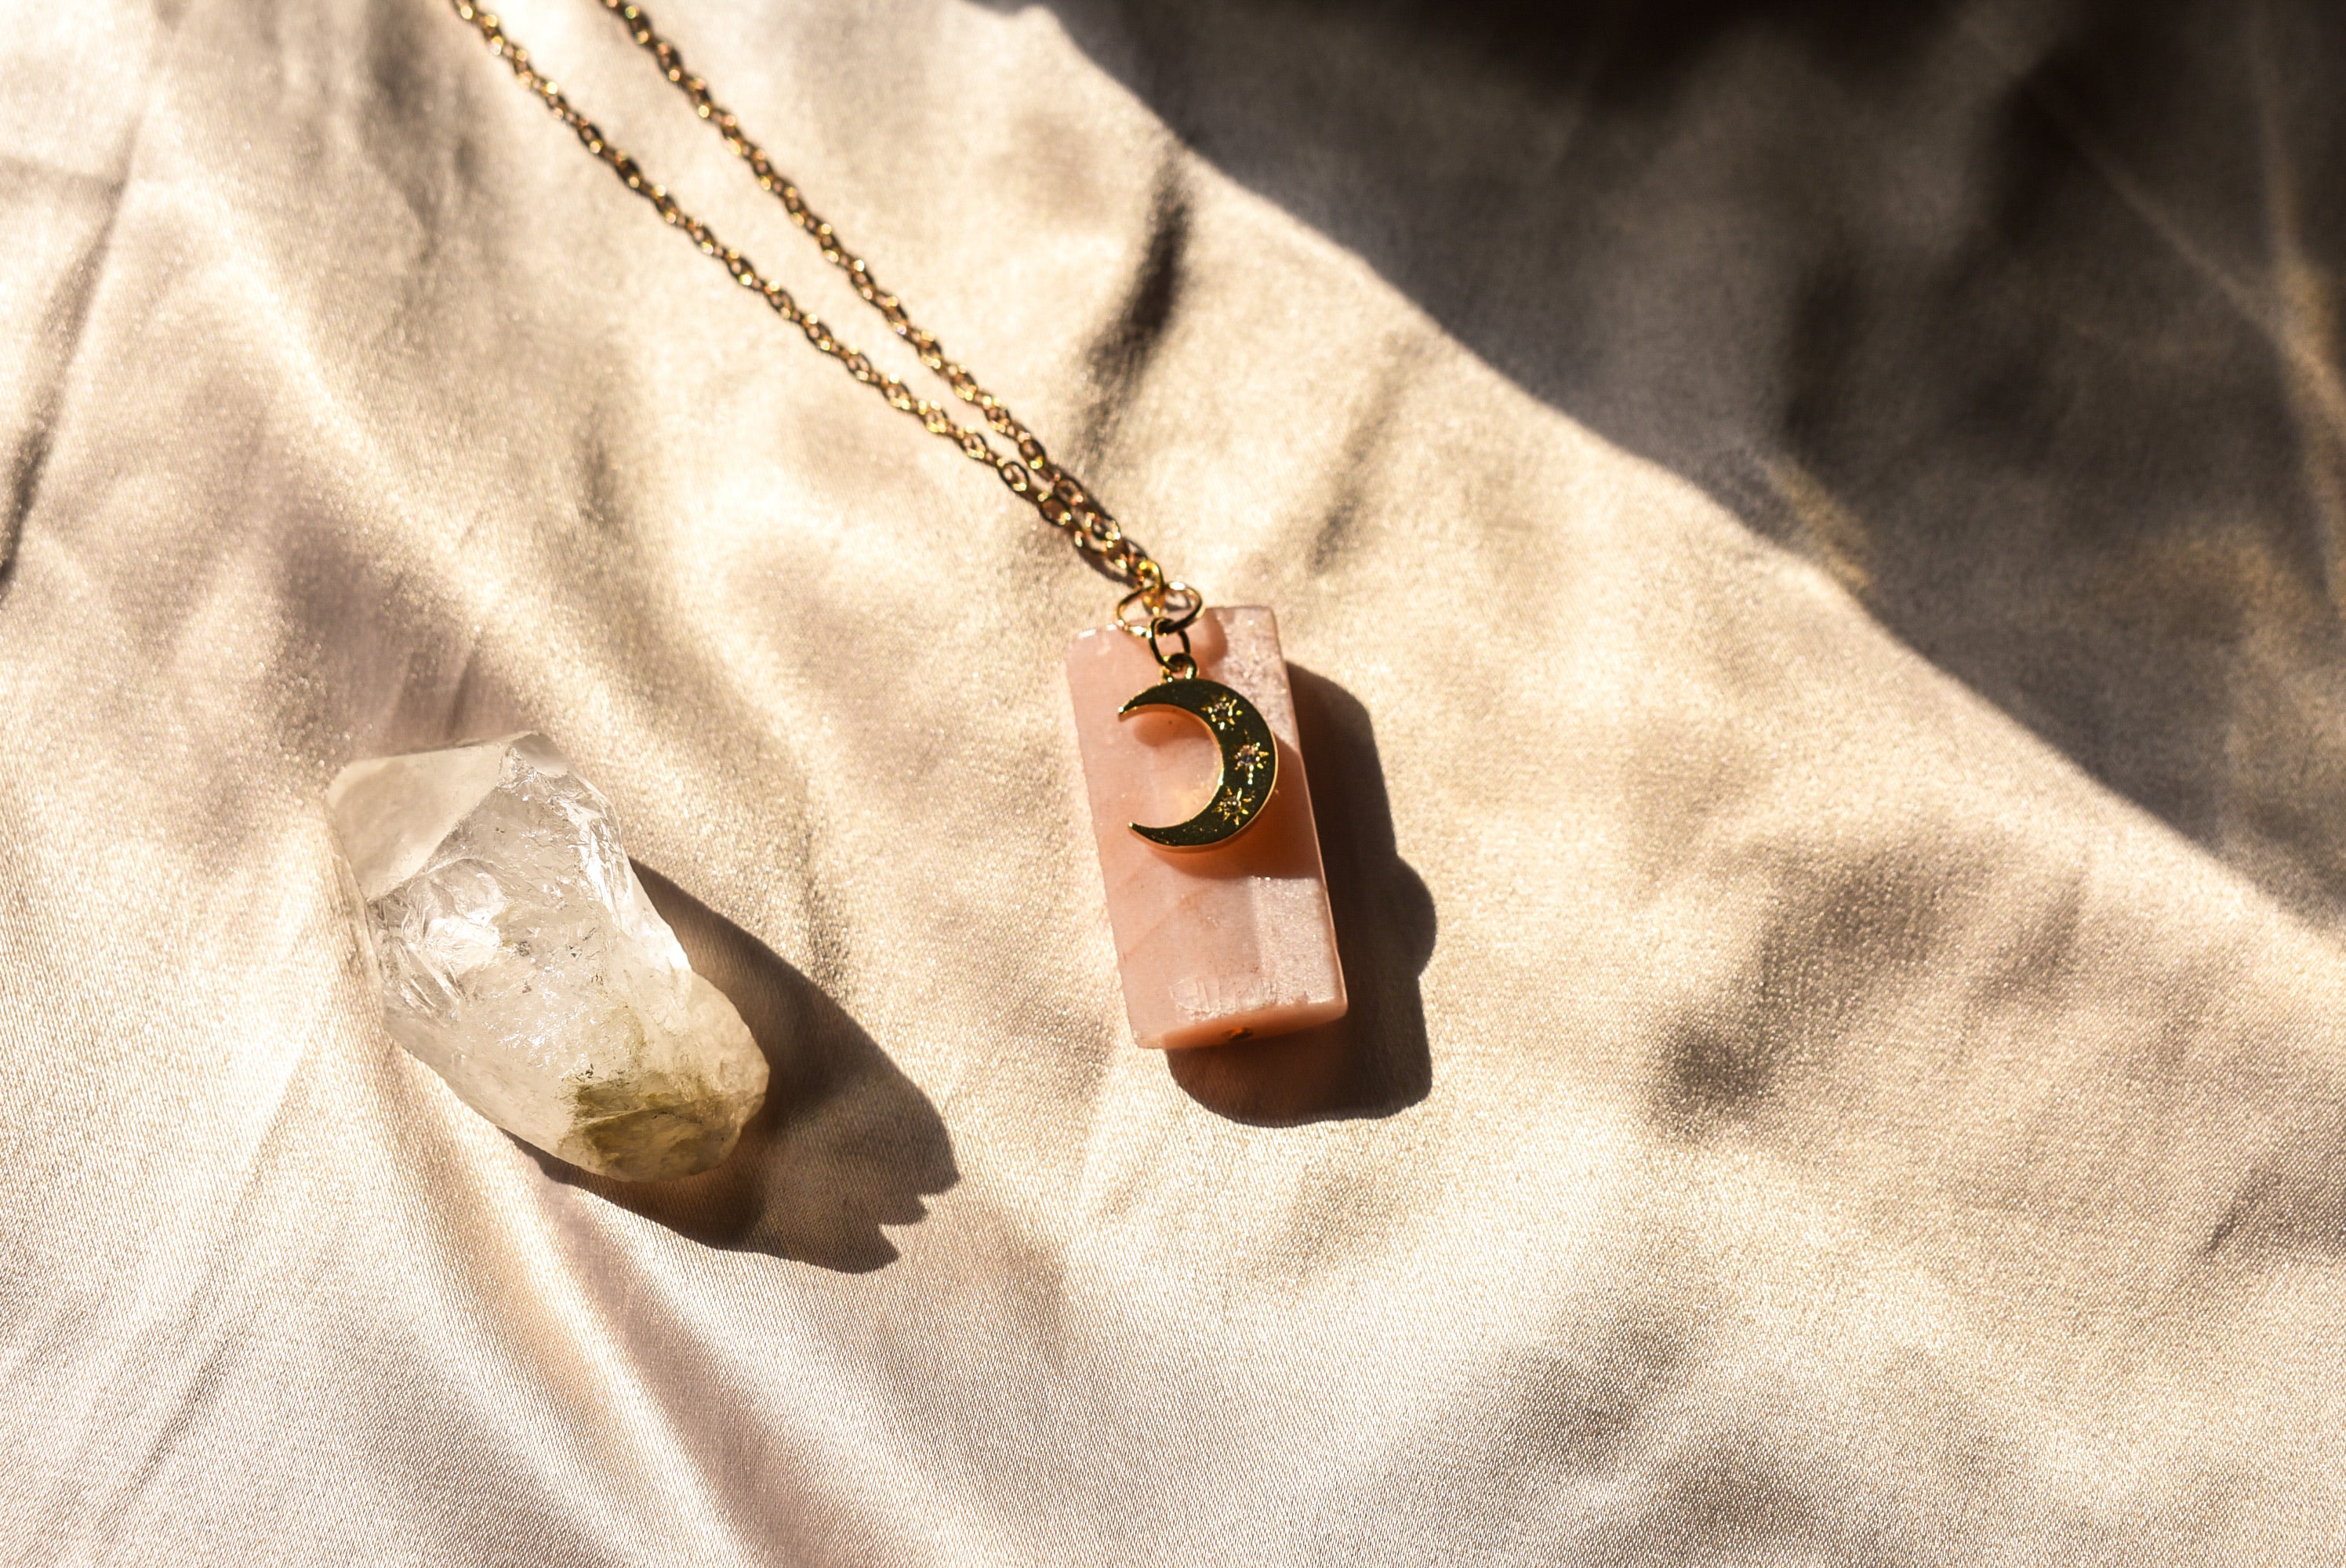 Peach Moonstone Necklace 14k Gold Filled